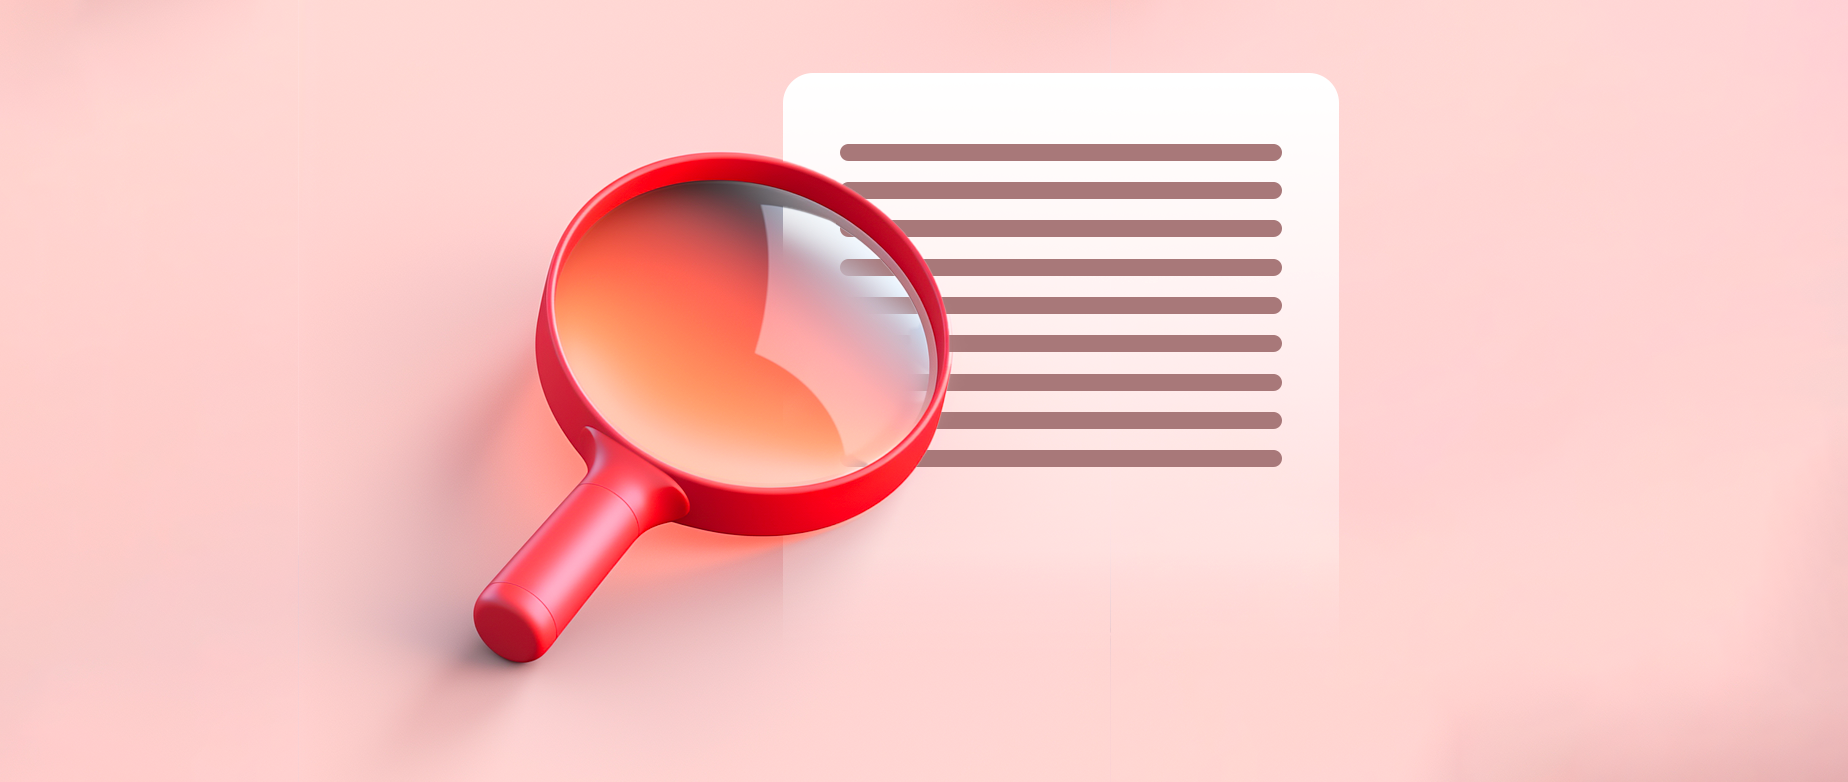 A magnifying glass with a white paper icon on a light pink background.